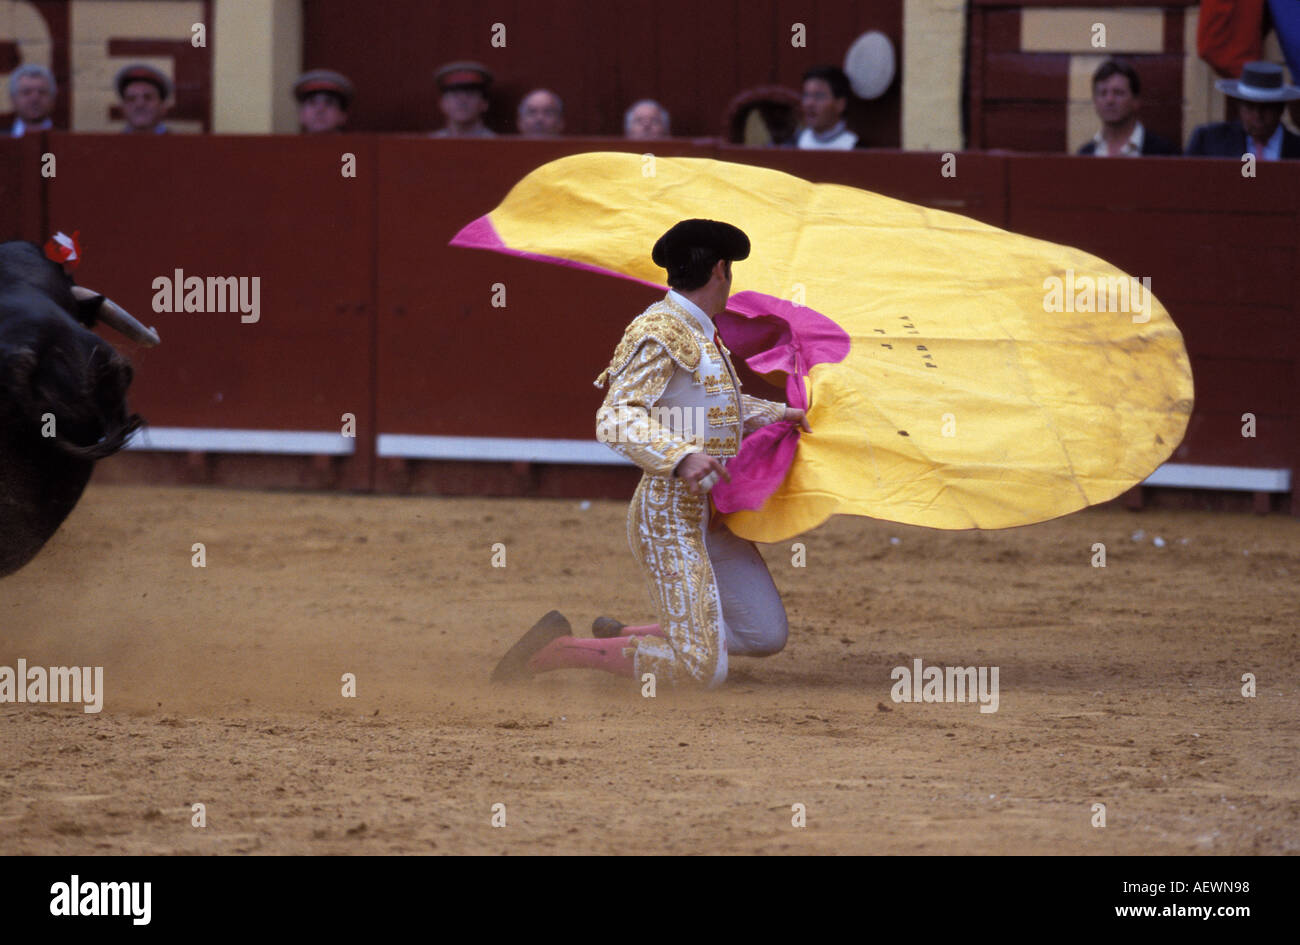 Bullfighter and bull in the arena last of a 3 picture sequence Stock Photo